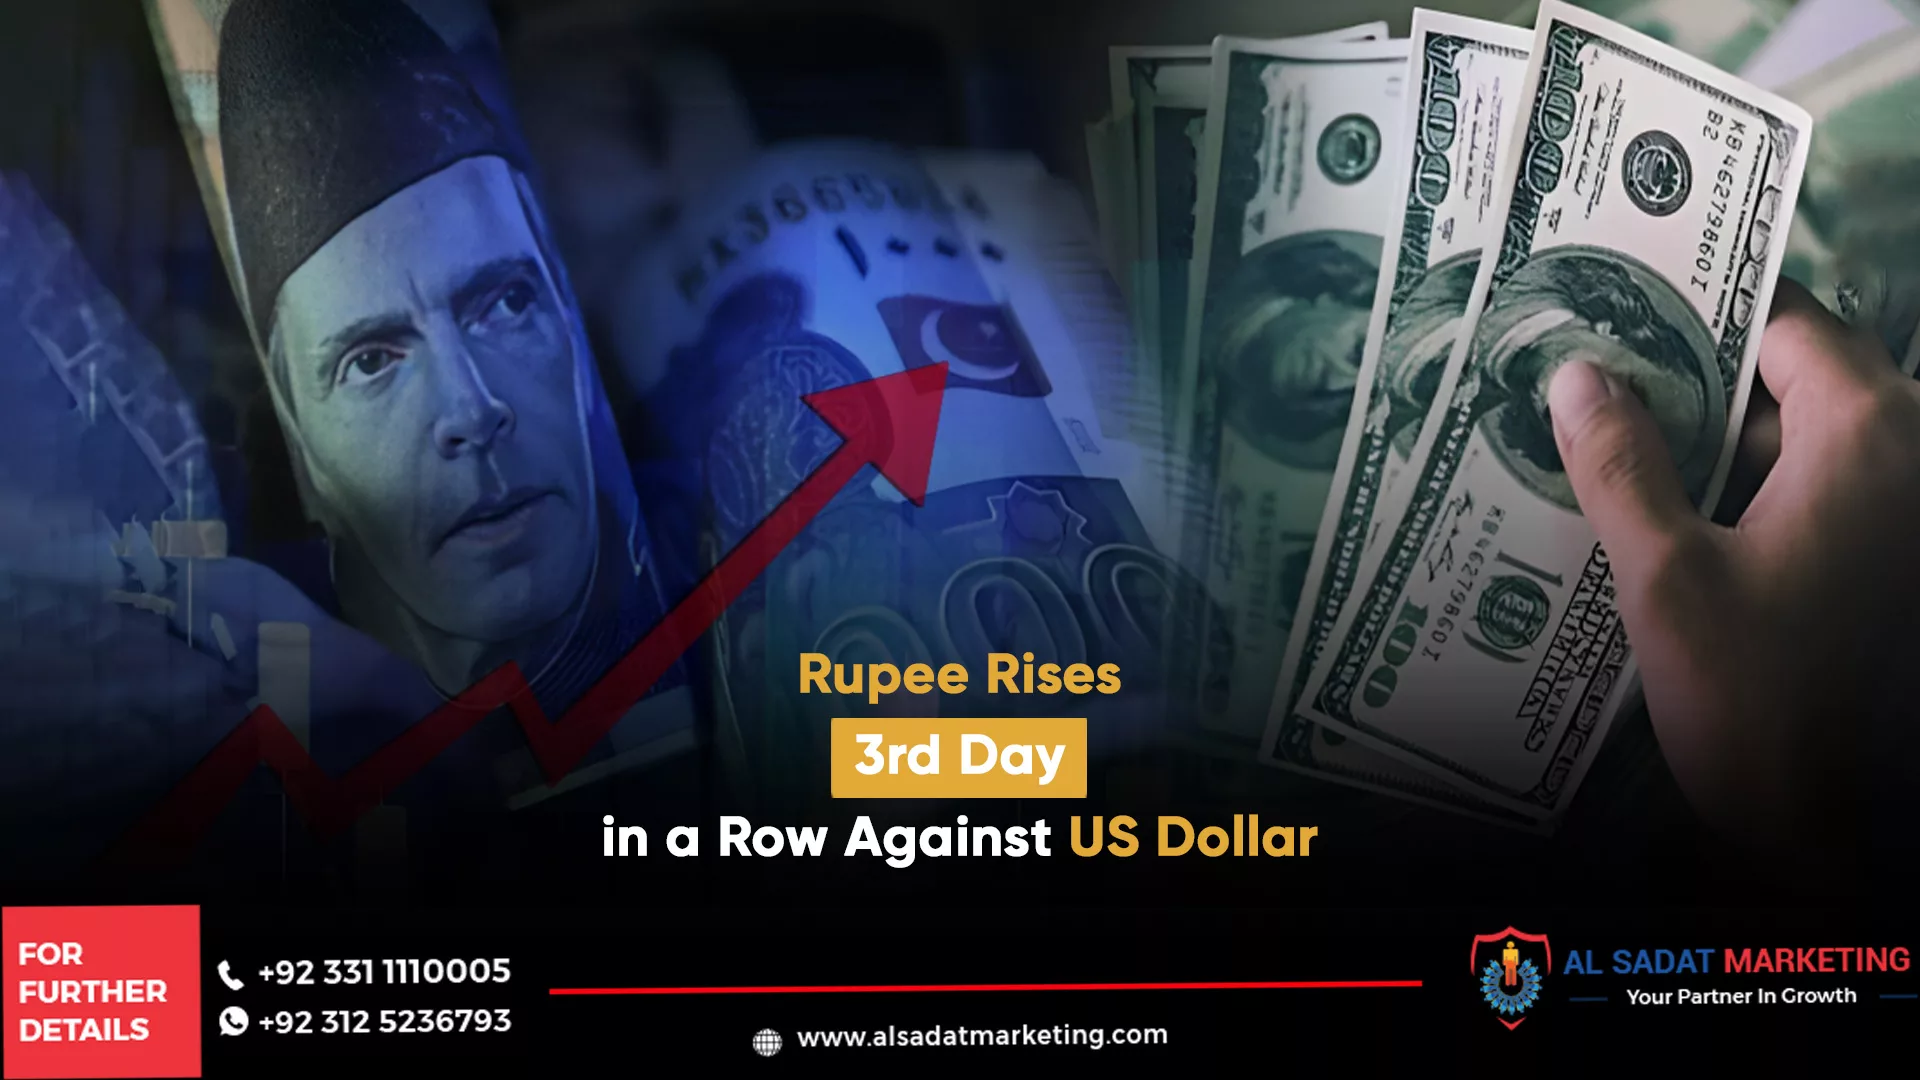 rupee rises 3rd day in a row against us dollar, al sadat marketing, real estate agency in blue area islamabad